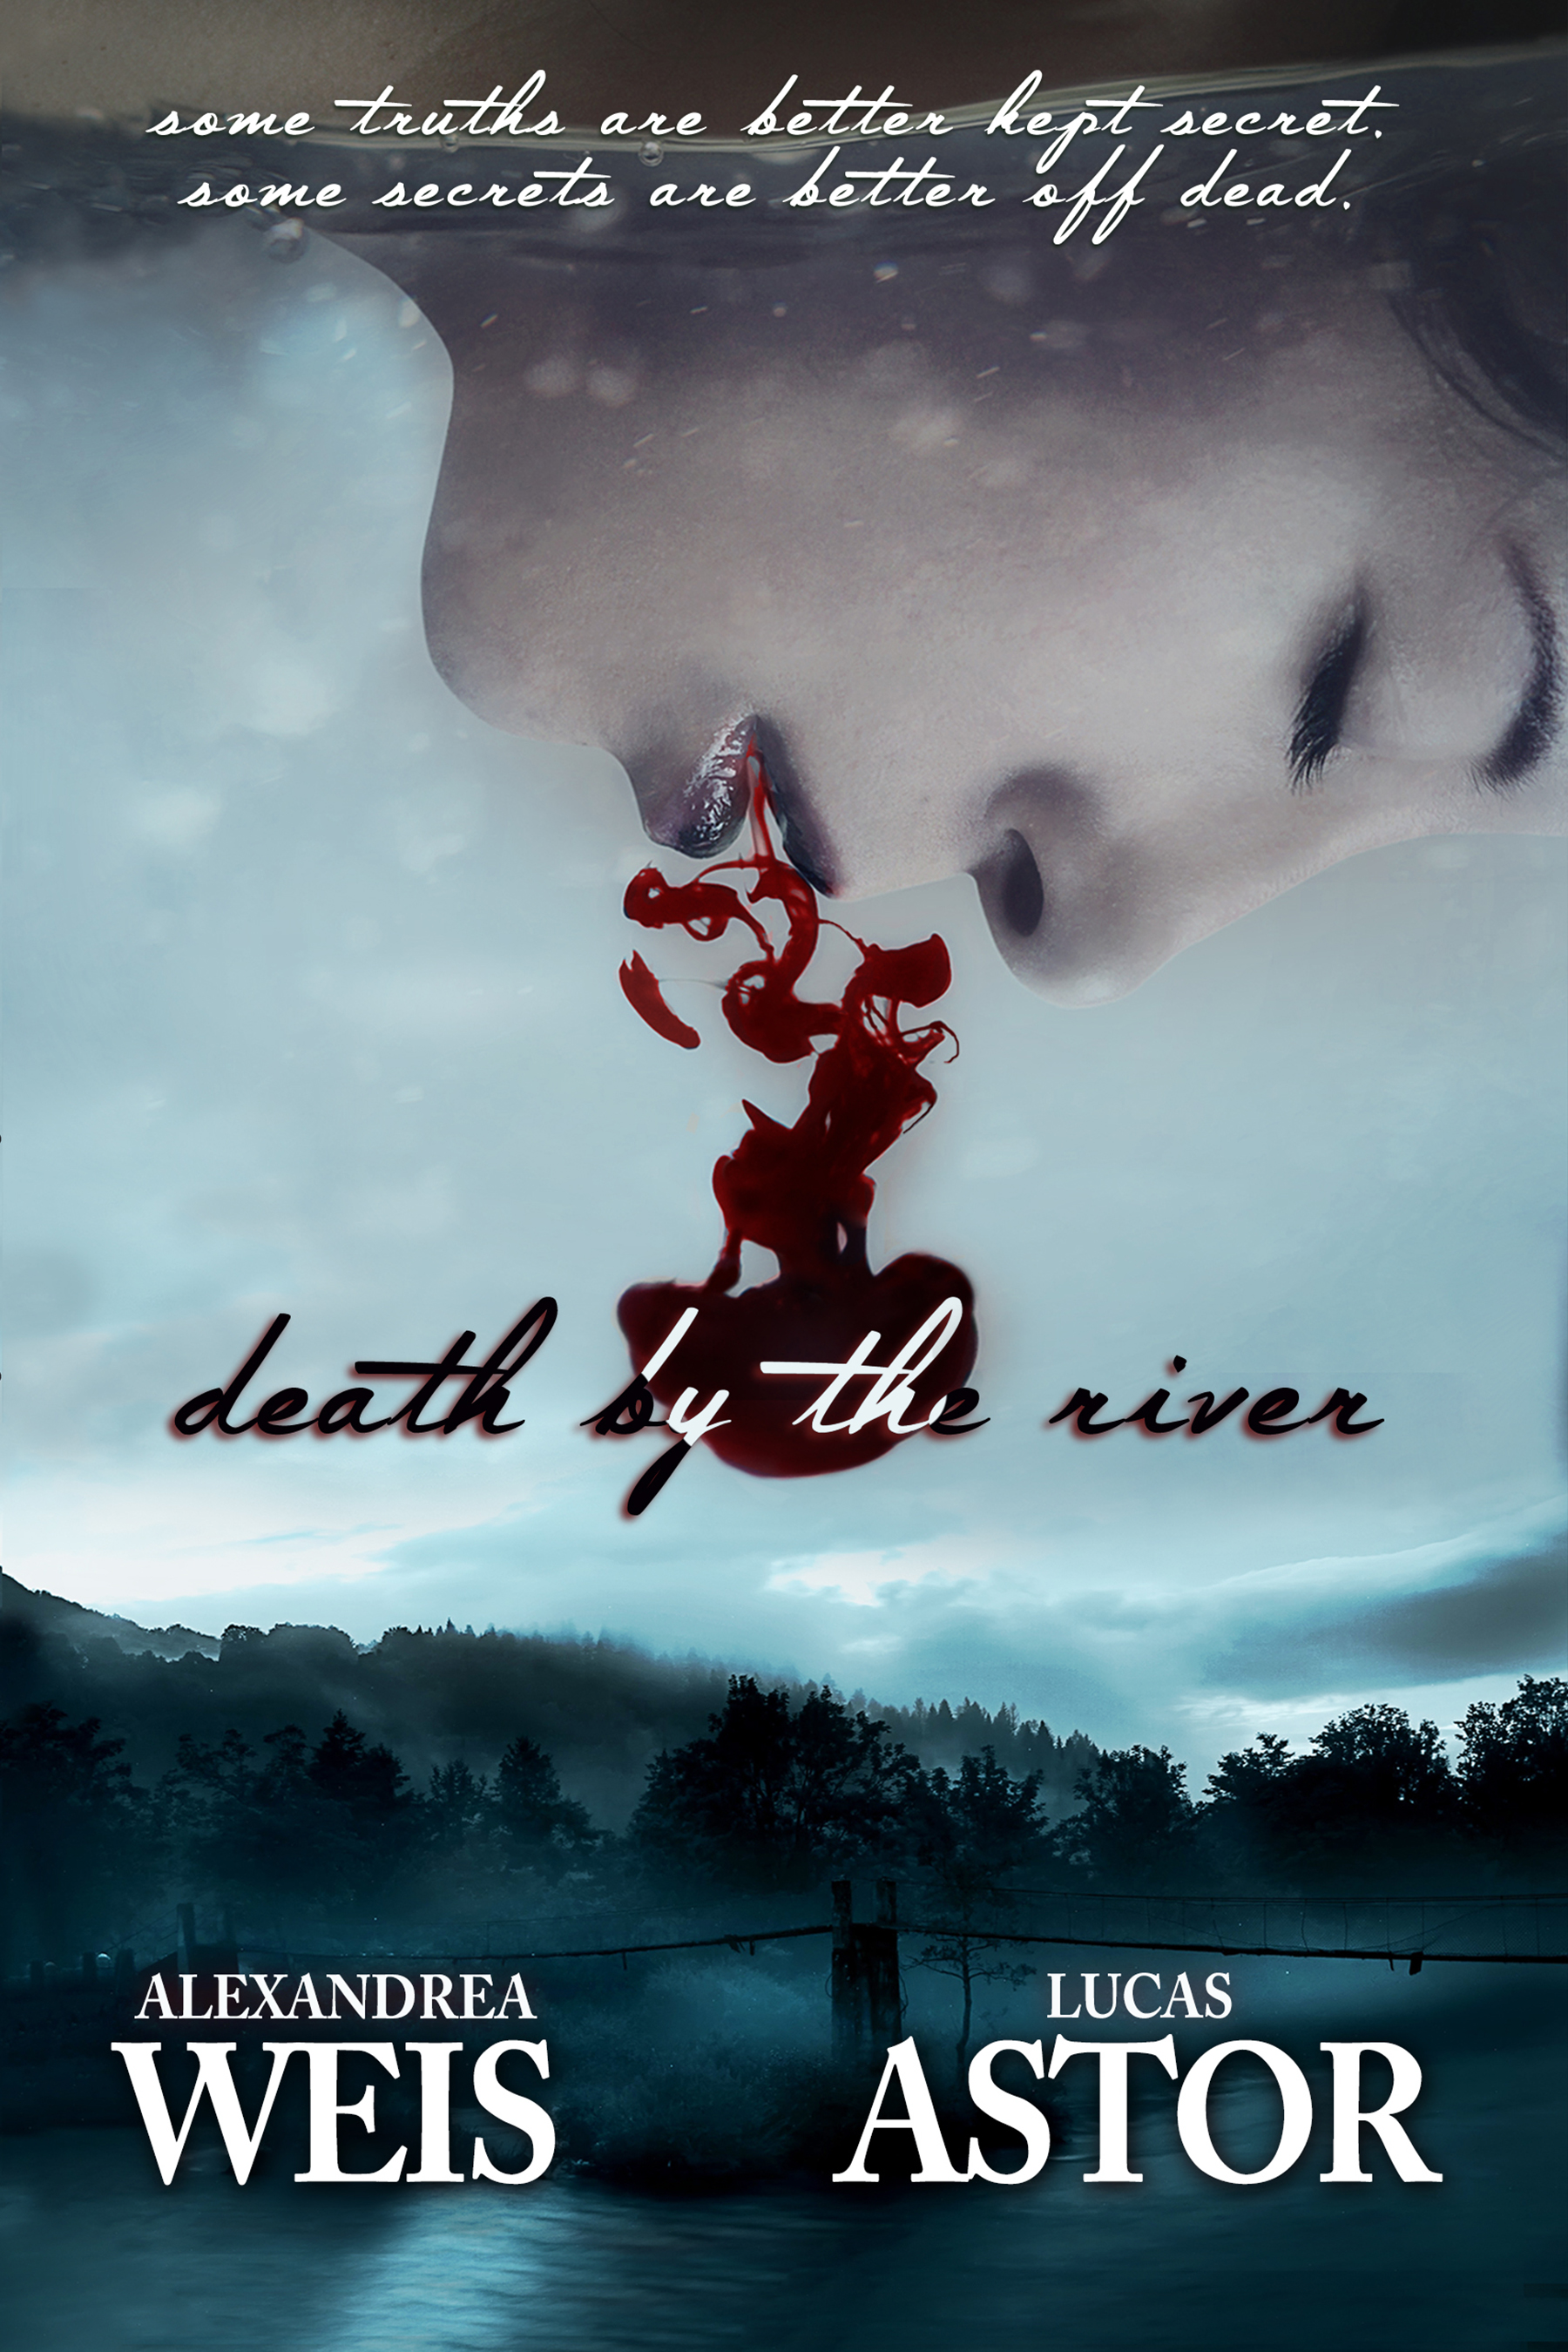 Death by the River by Alexandrea Weis and Lucas Astor